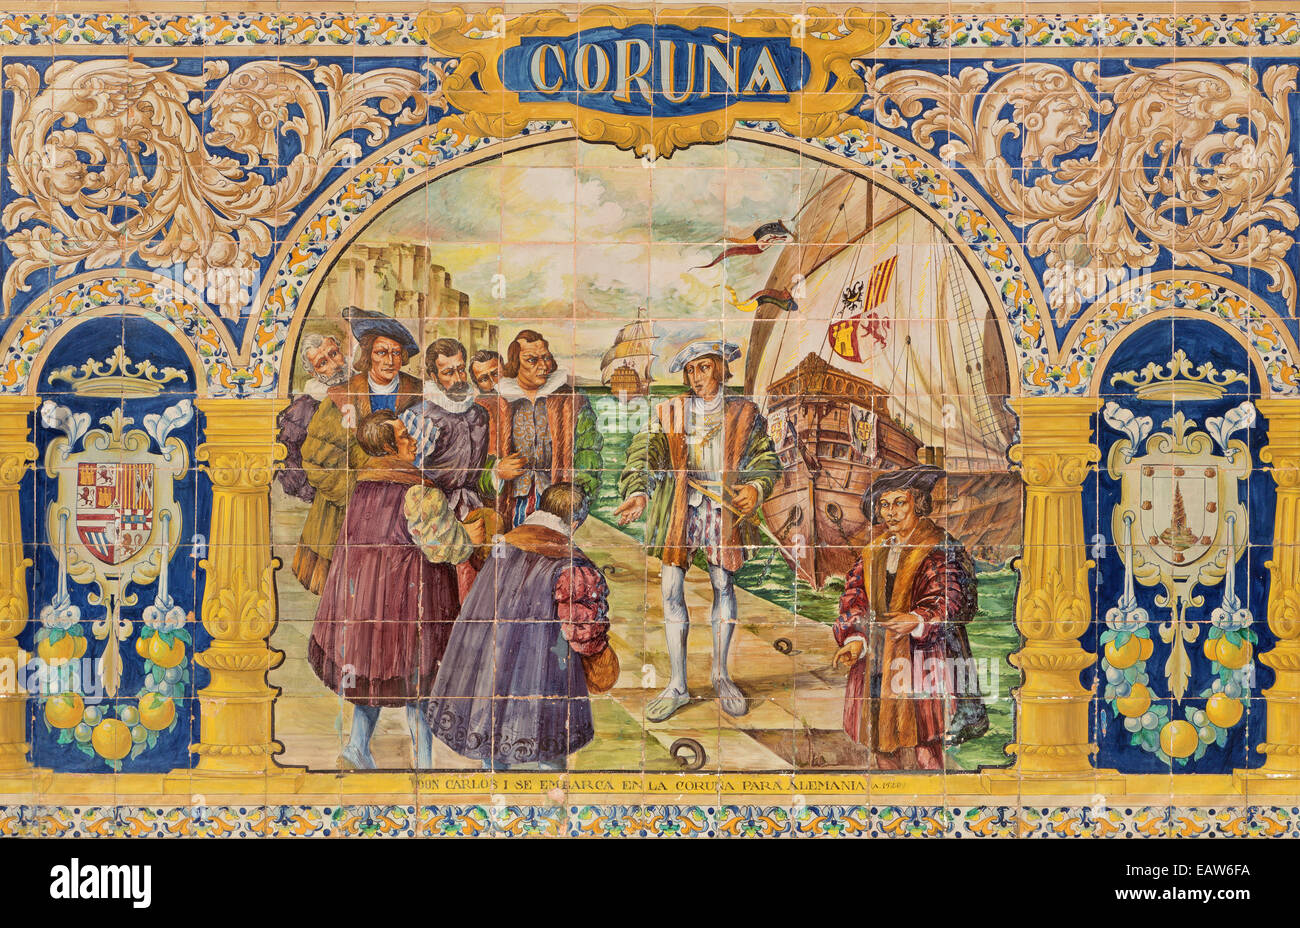 Seville - The Coruna as one of The tiled 'Province Alcoves' along the walls of the Plaza de Espana (1920s) by Domingo Prida. Stock Photo